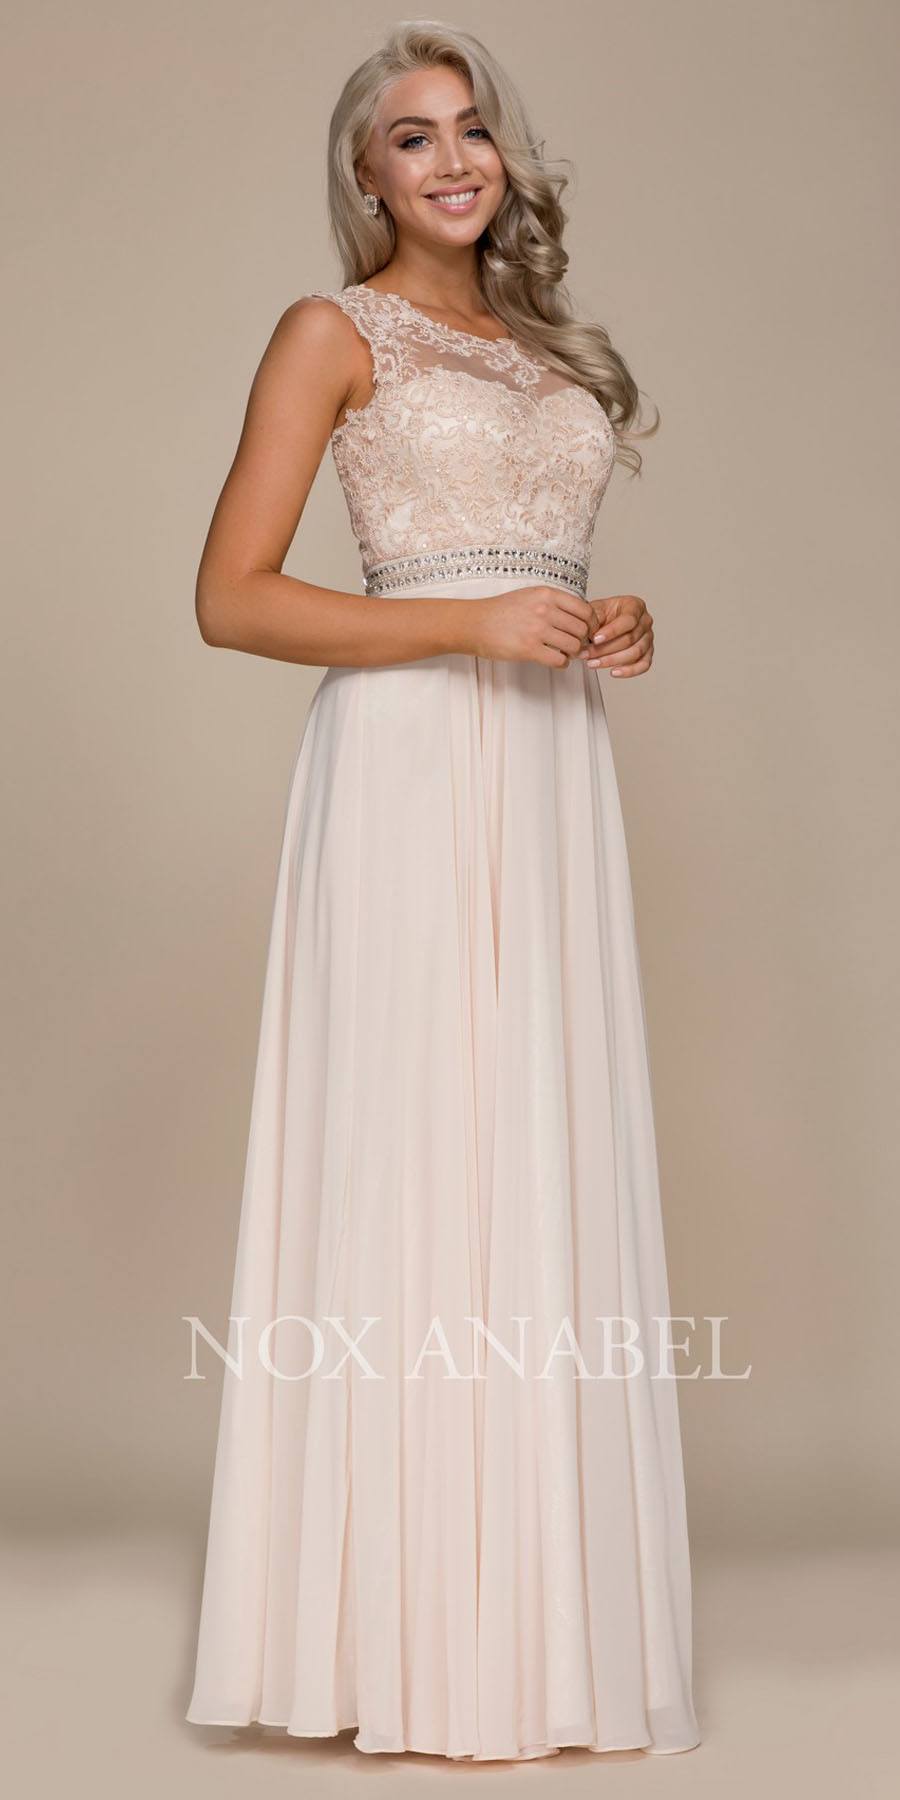 Nox Anabel Y101 Champagne A-line Long Formal Dress Lace Bodice Keyhole Back